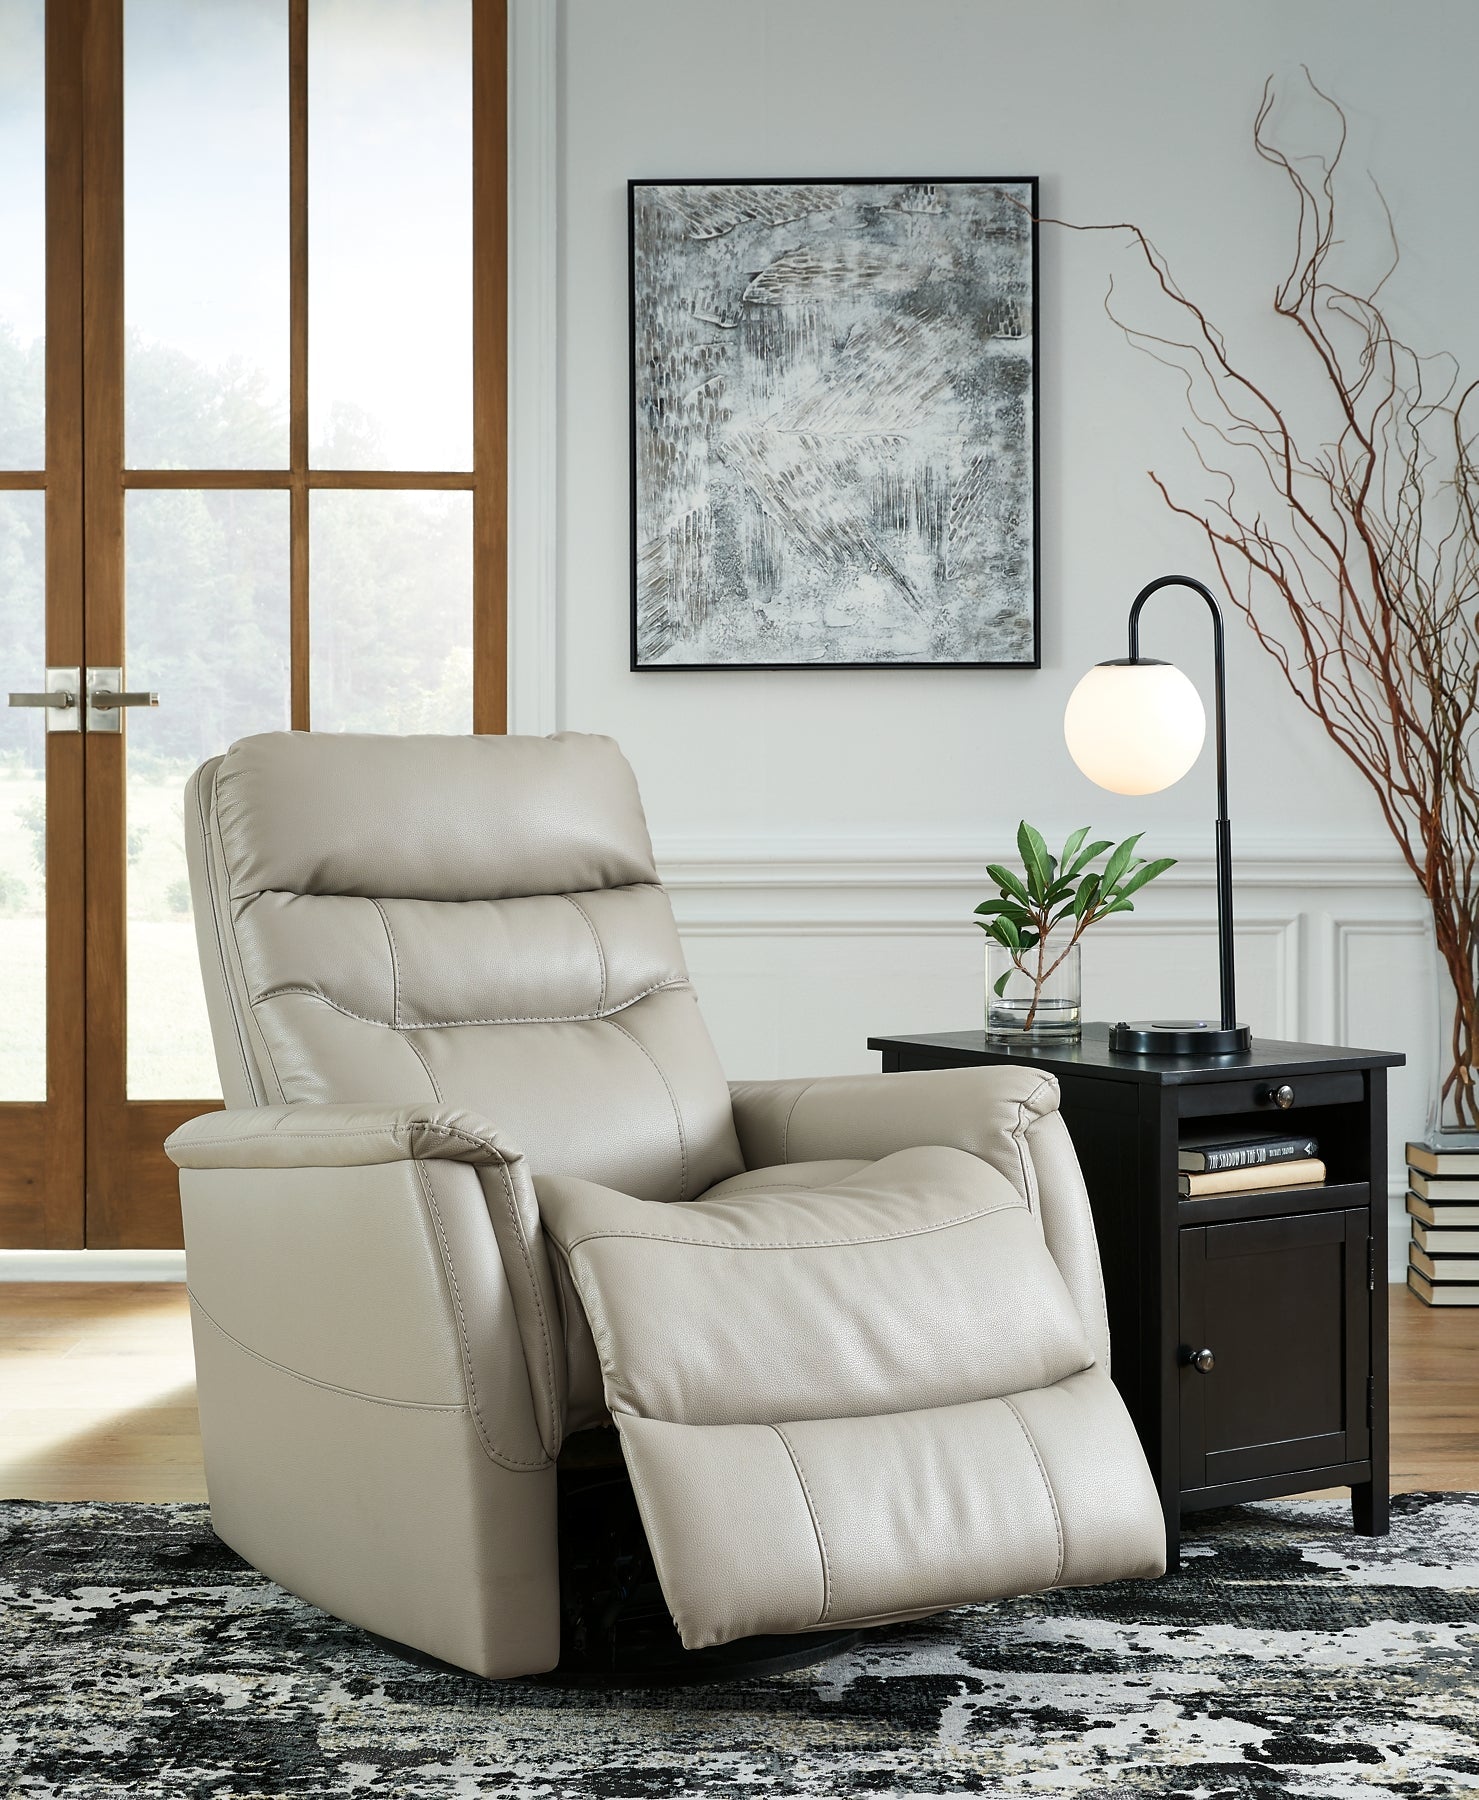 Riptyme Swivel Glider Recliner Rent Wise Rent To Own Jacksonville, Florida